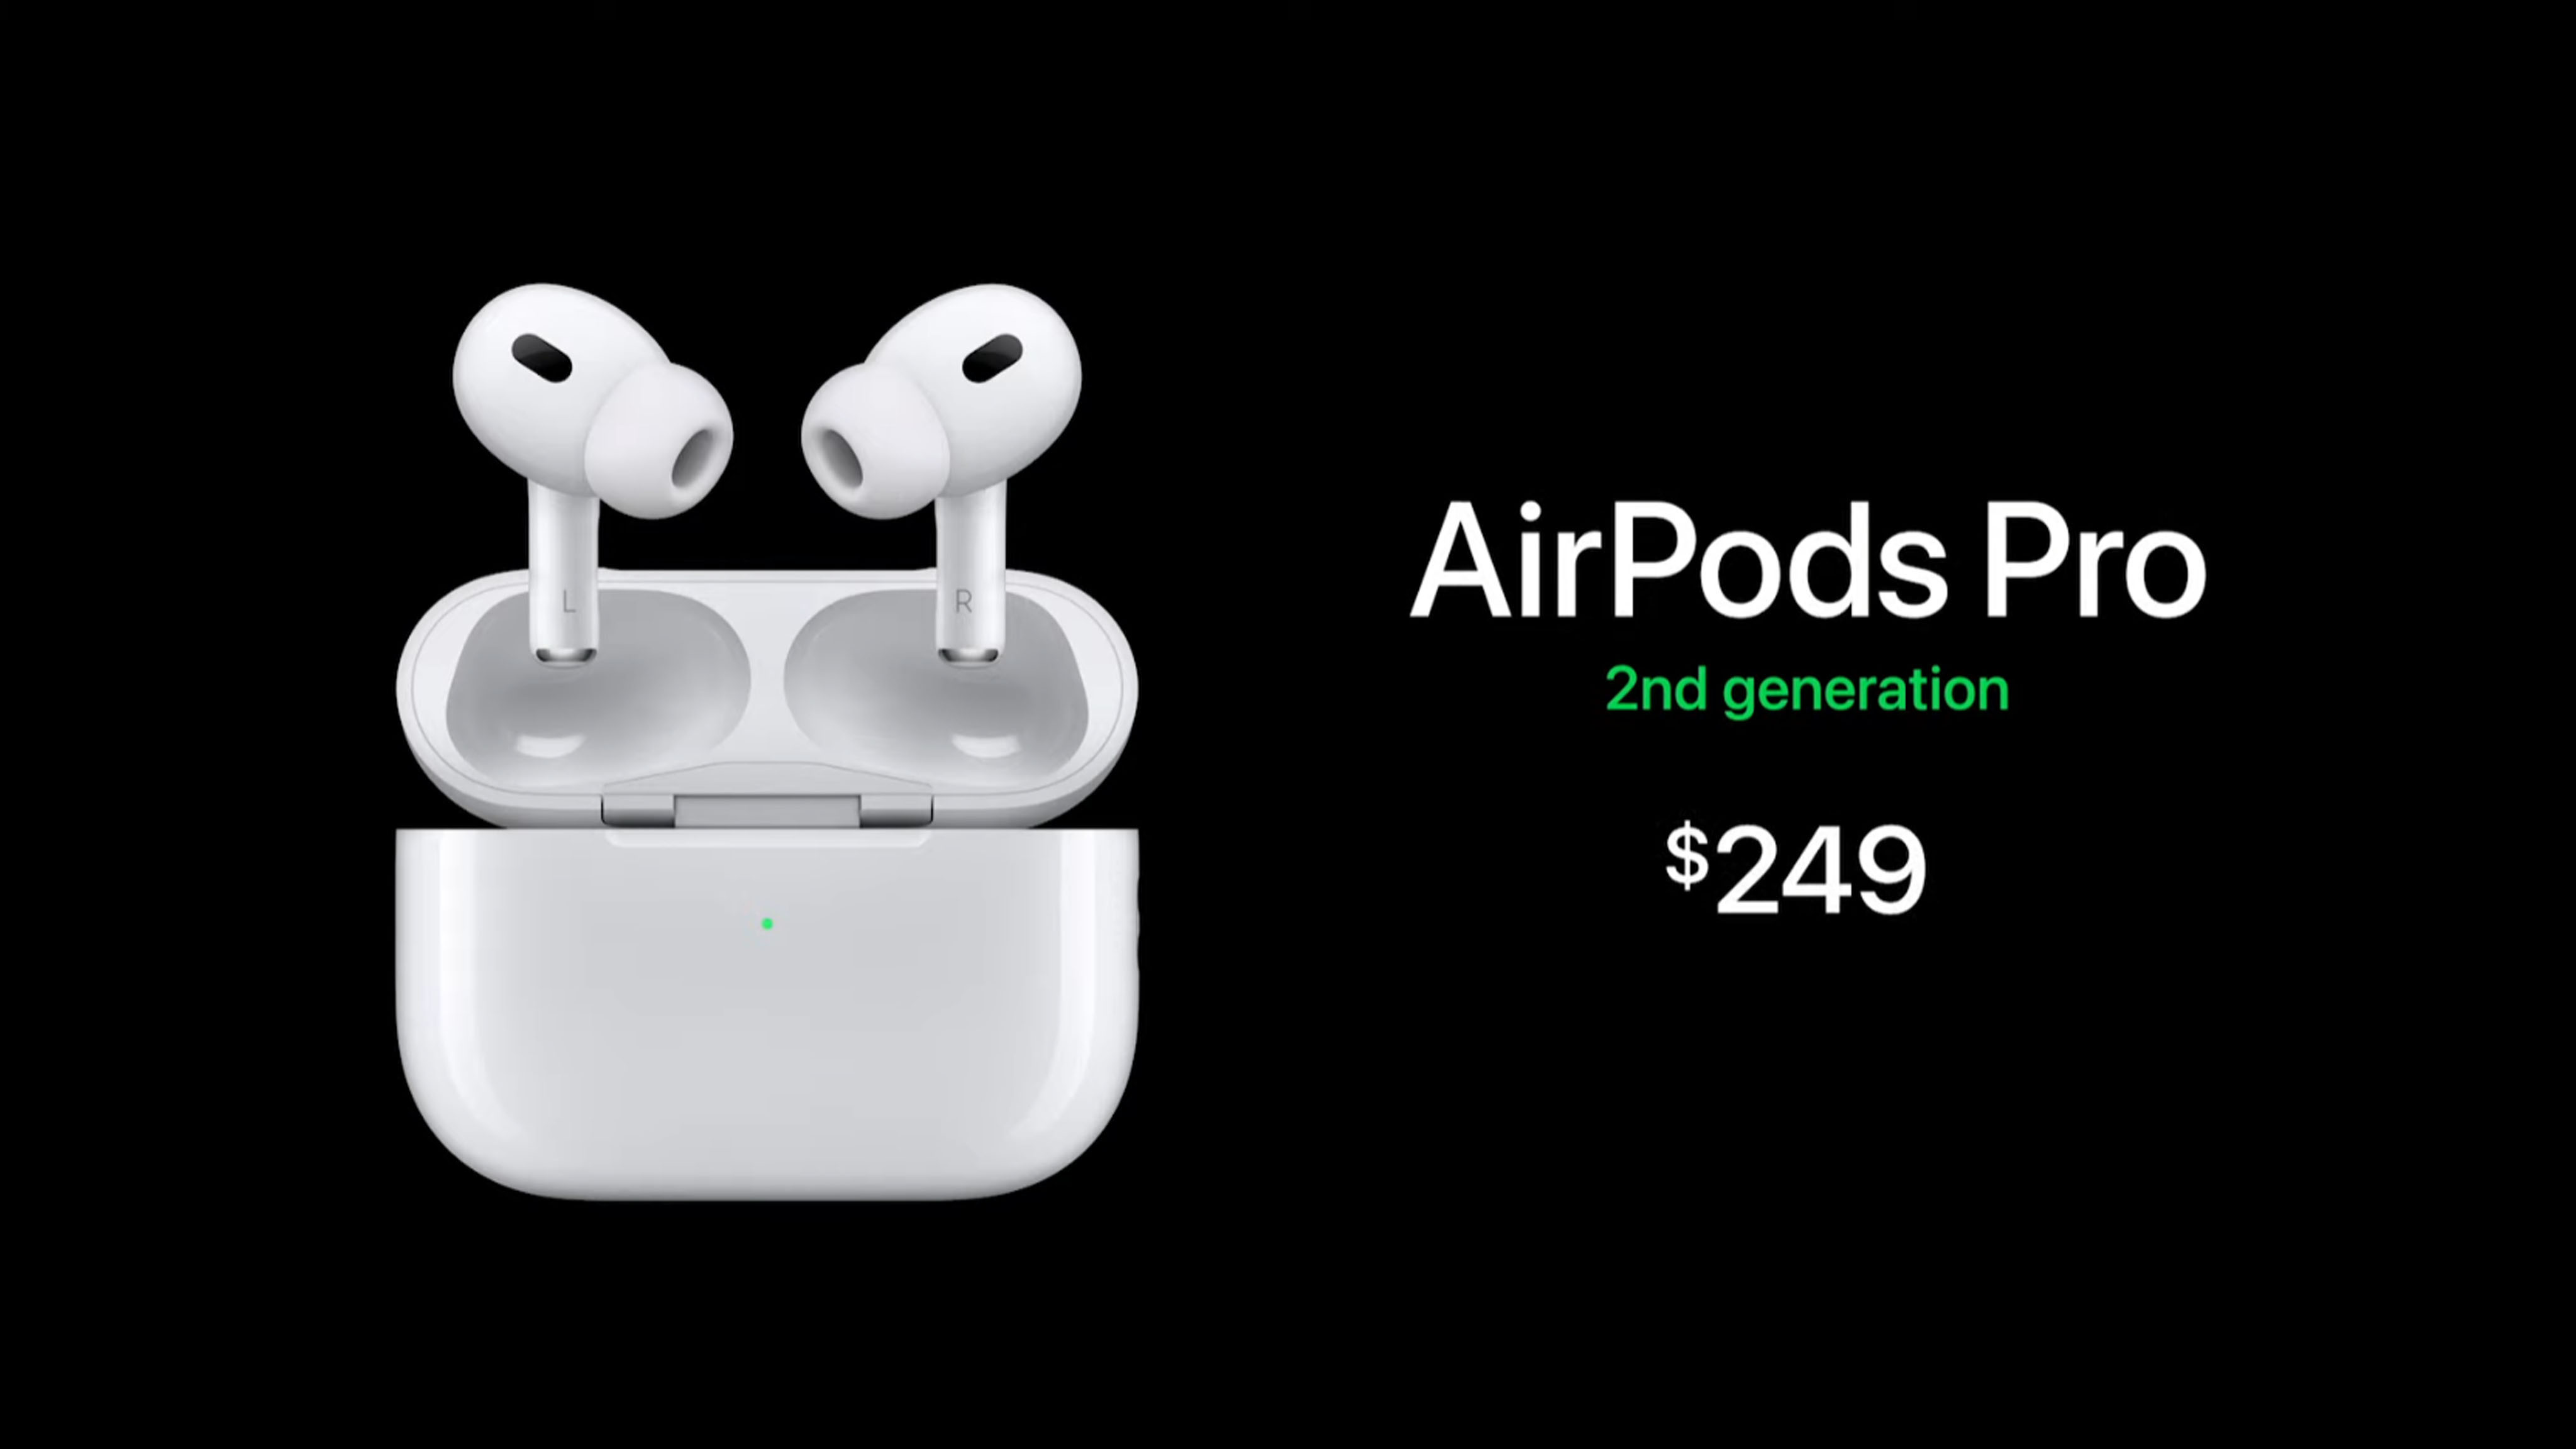 Apple Aipods Pro 2